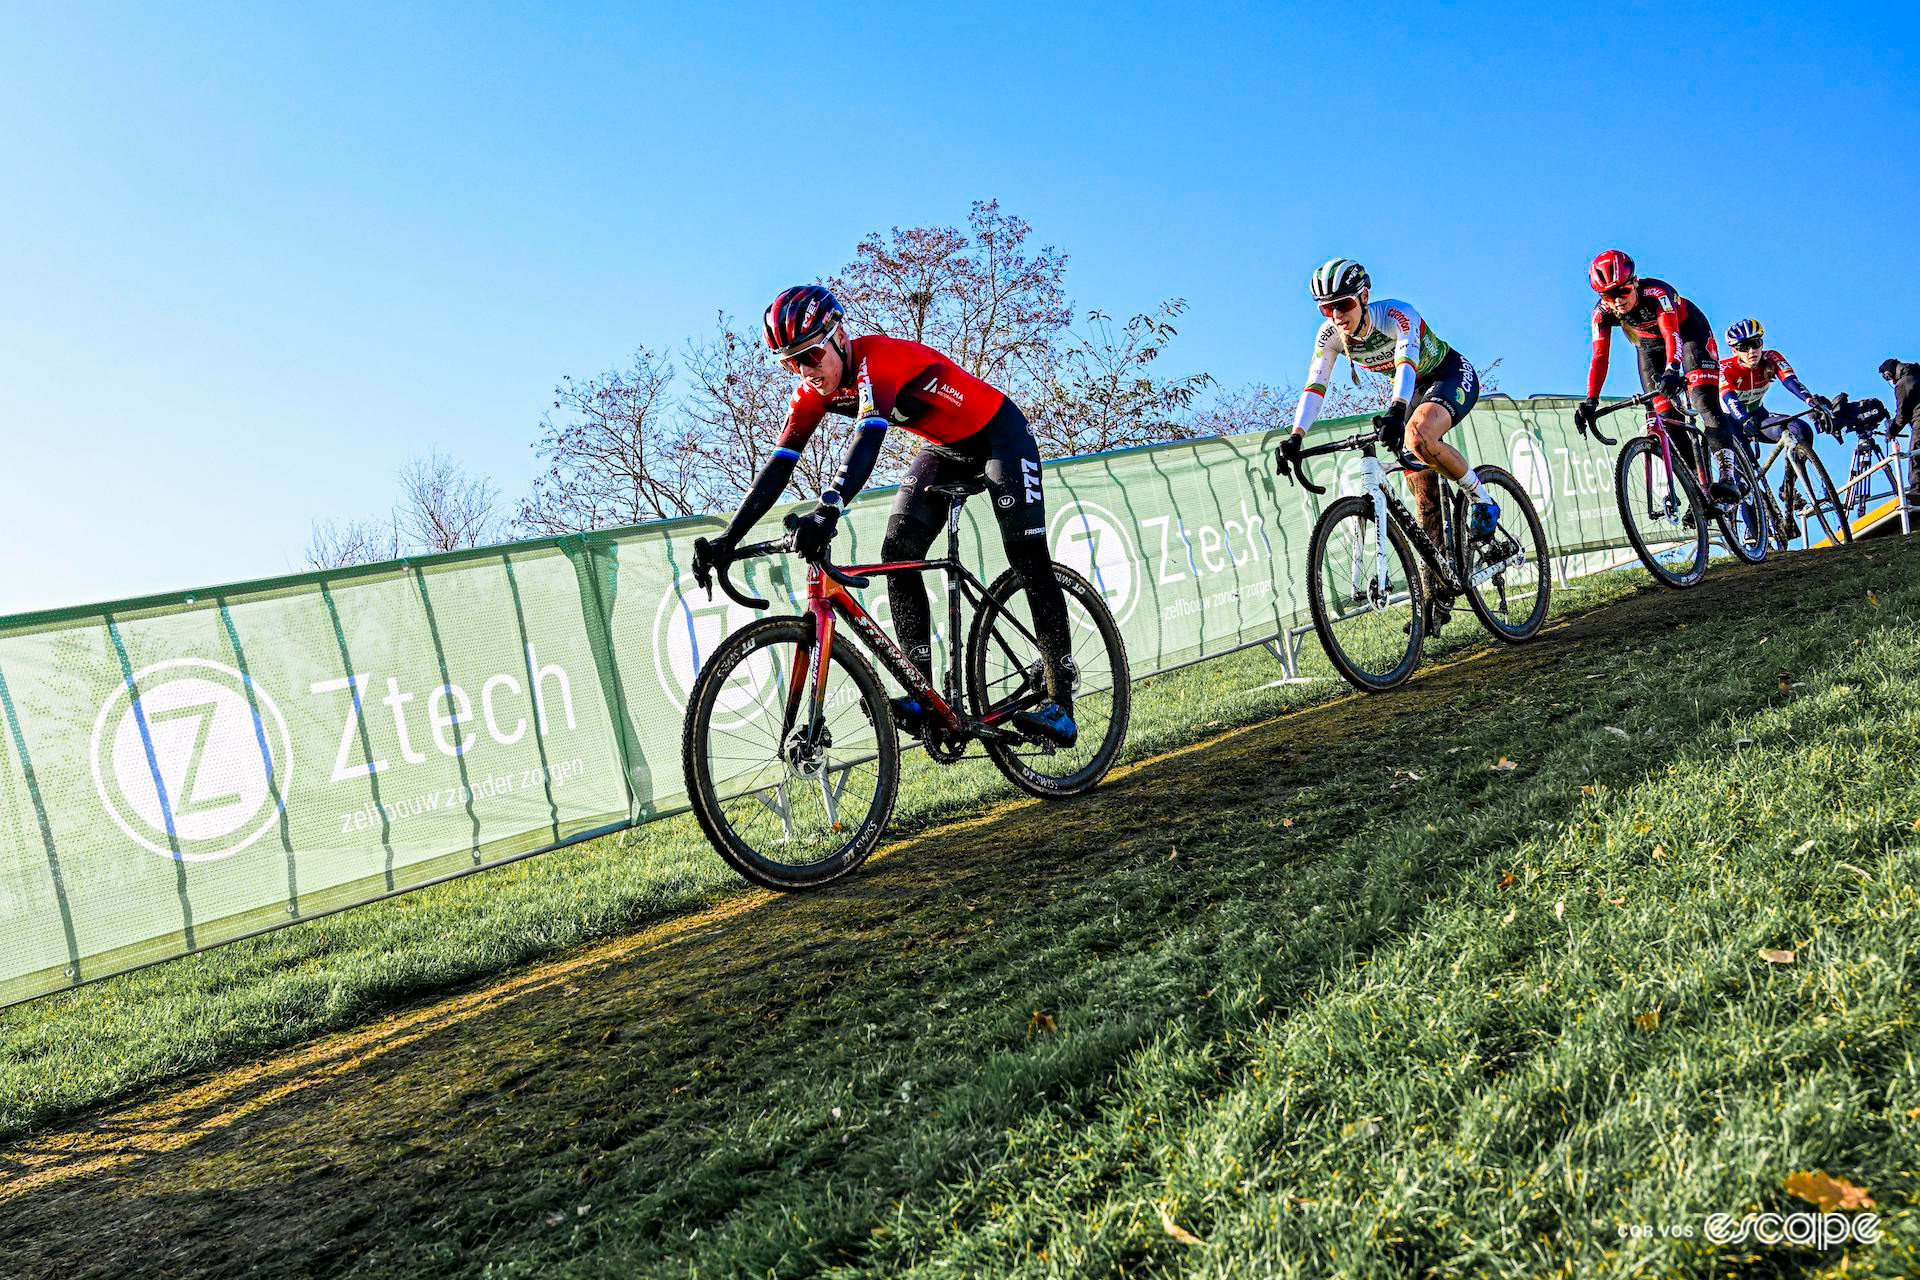 Annemerie Worst of Cyclocross Reds leads a group on a grassy descent against a clear blue sky during Cyclocross Superprestige Boom.